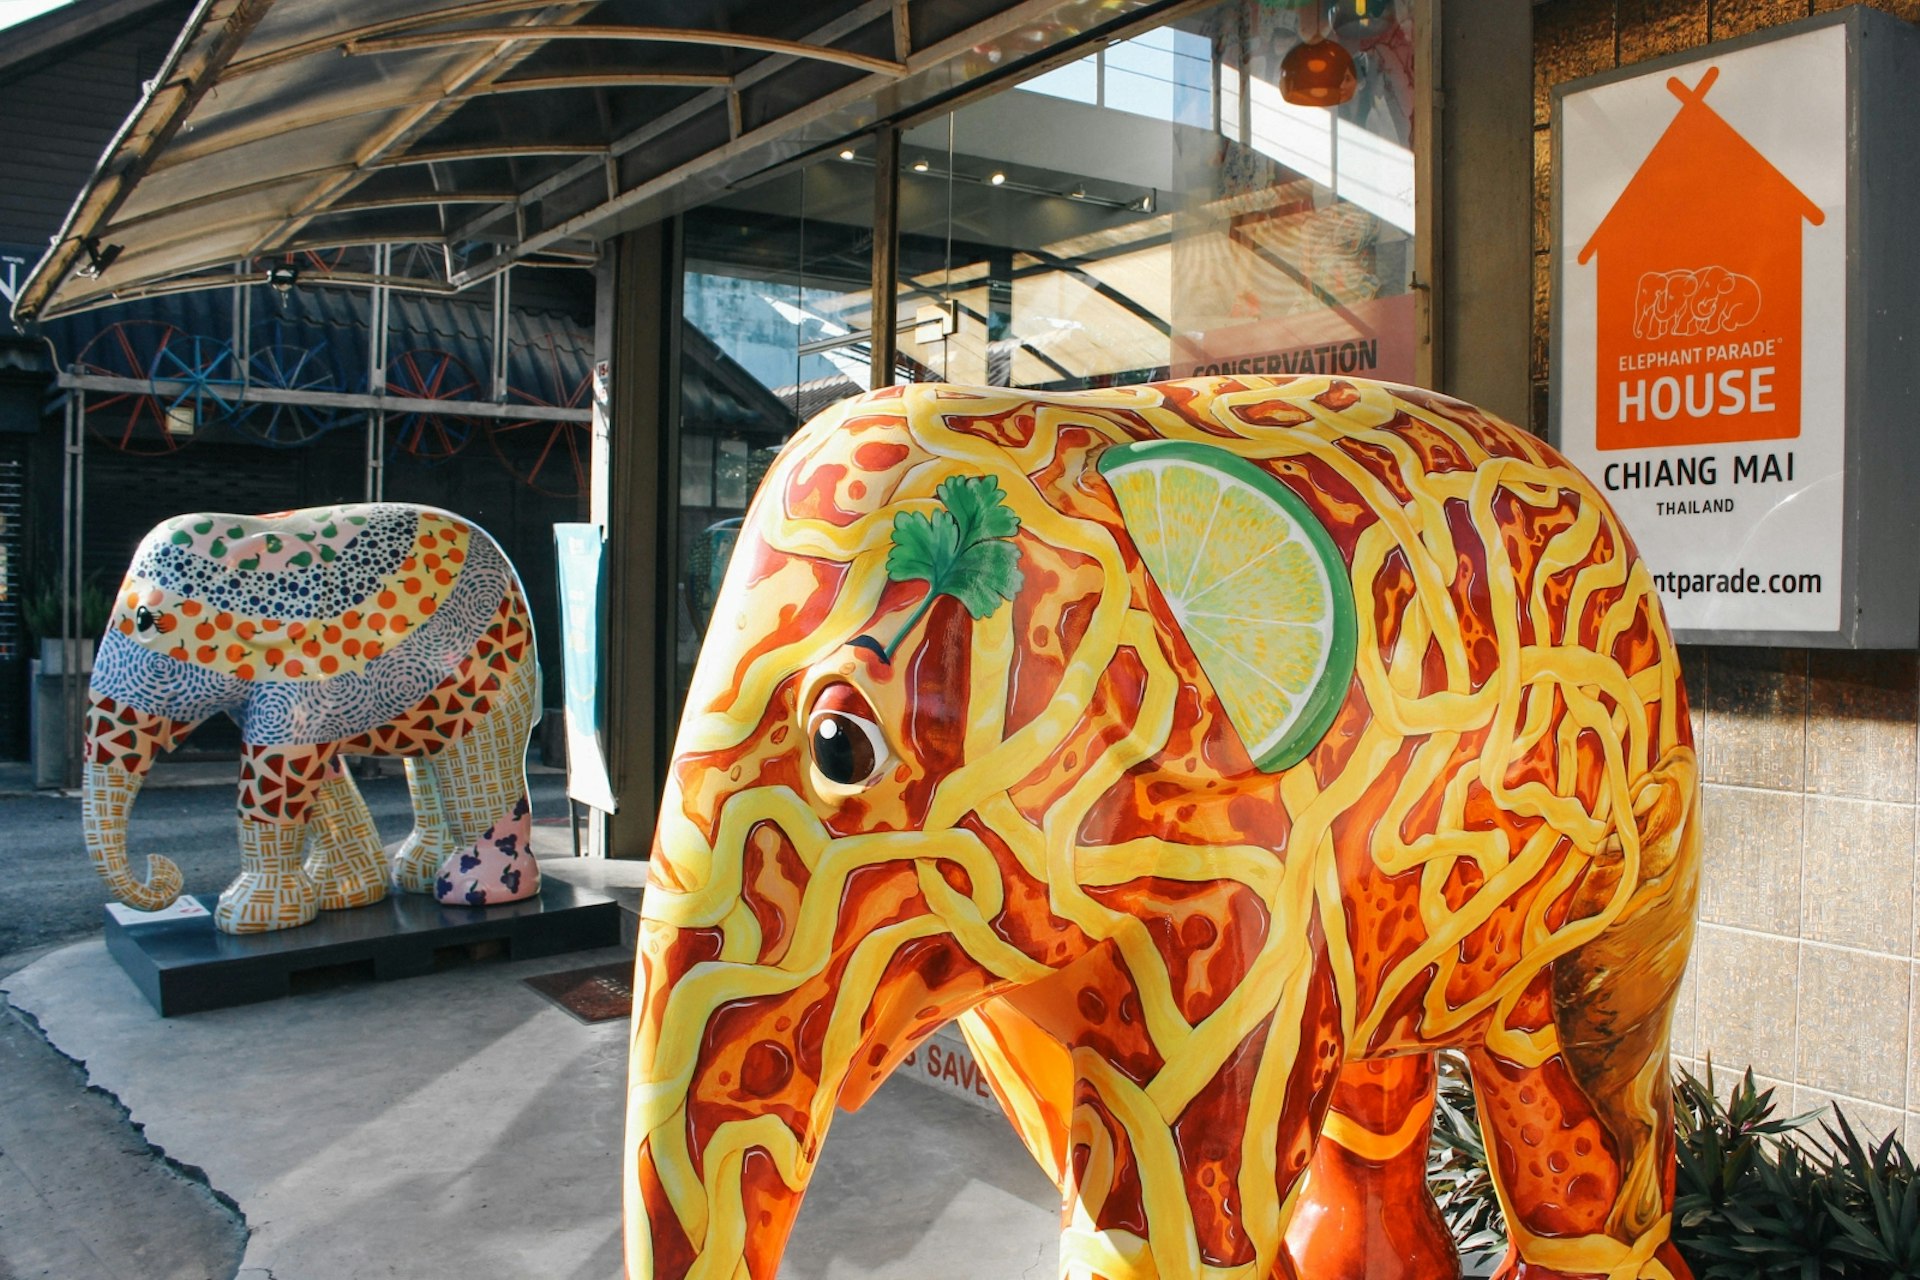 The Elephant Parade House organisation raises awareness for Asian elephant welfare with artistic elephant statues © Alana Morgan / Lonely Planet